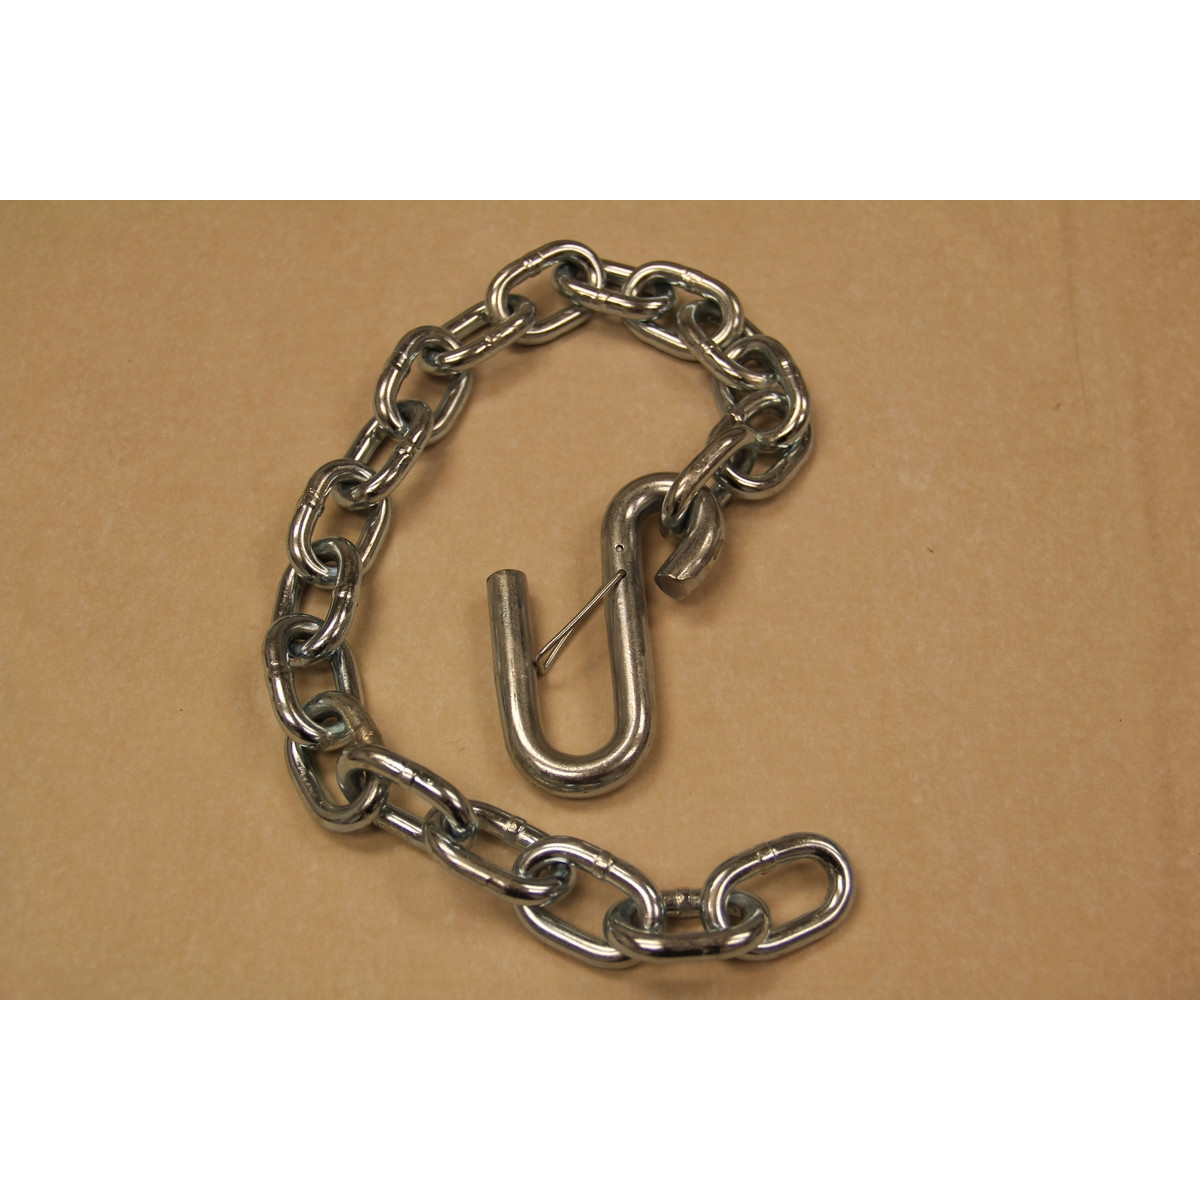 Safety Chain S Hook 5/16x27 Mx